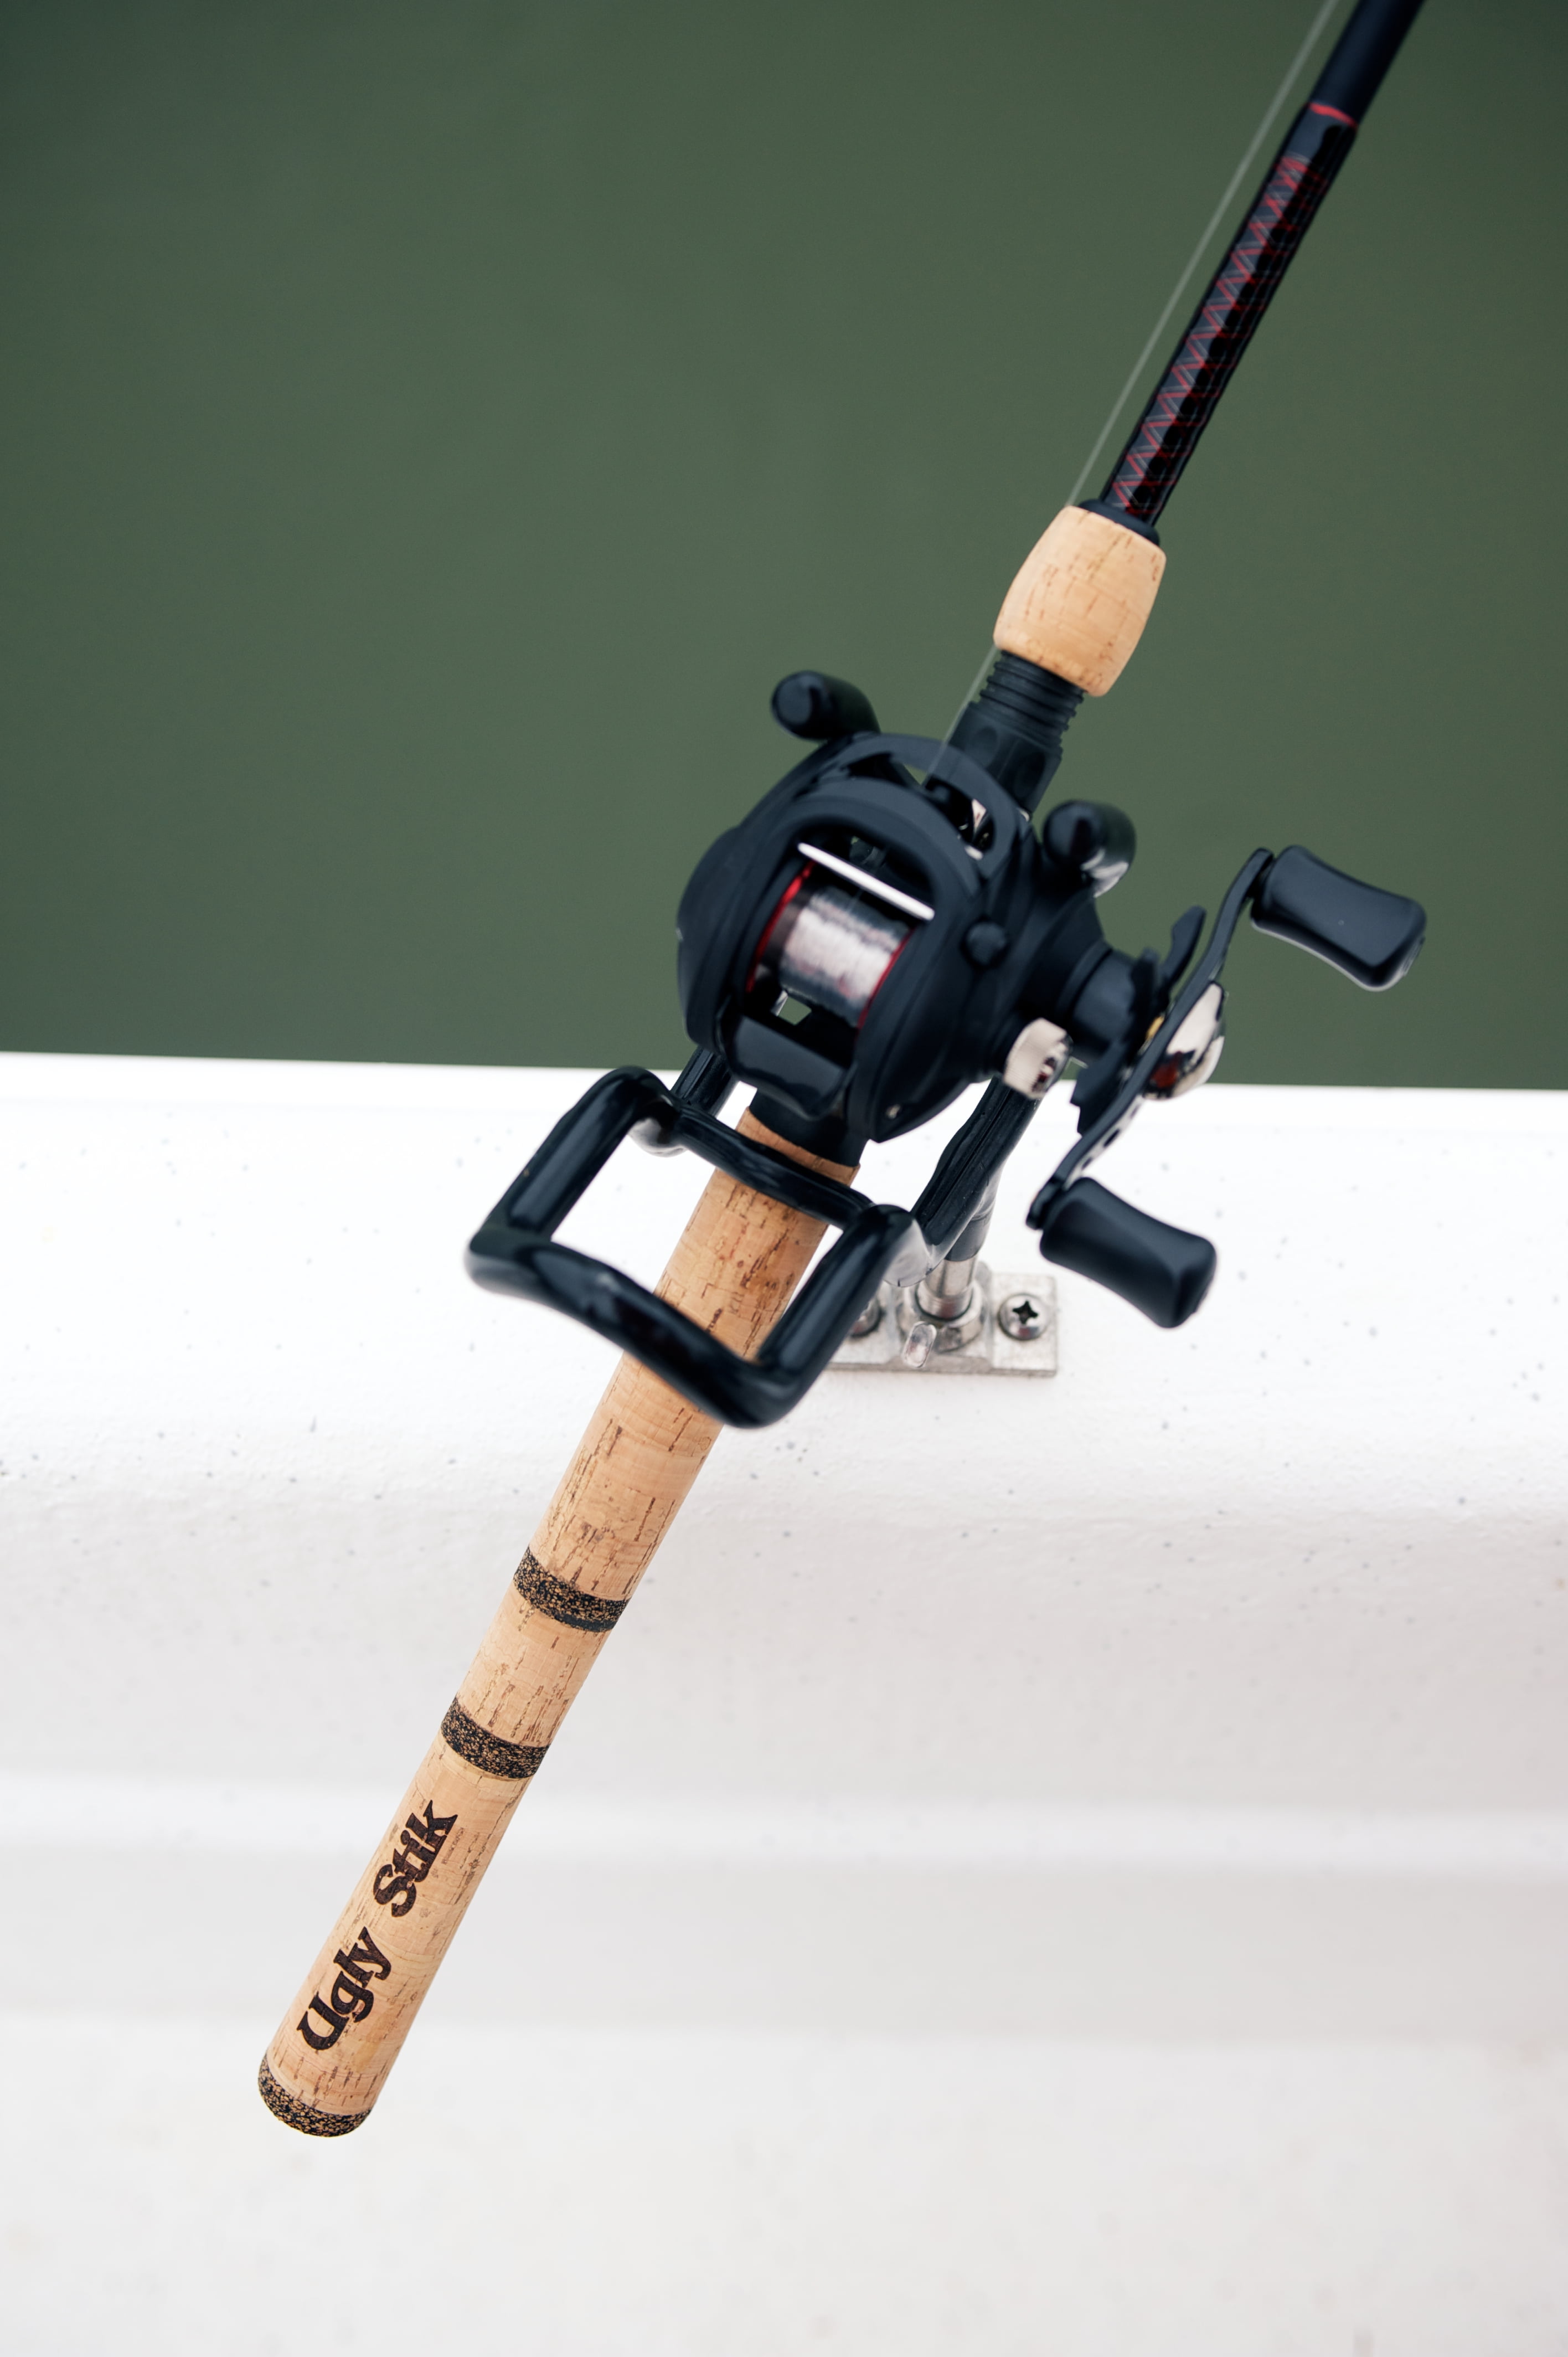 My first set up ugly stik elite 6'6 with a pen fierce 4 3000 reel how did I  do? : r/Fishing